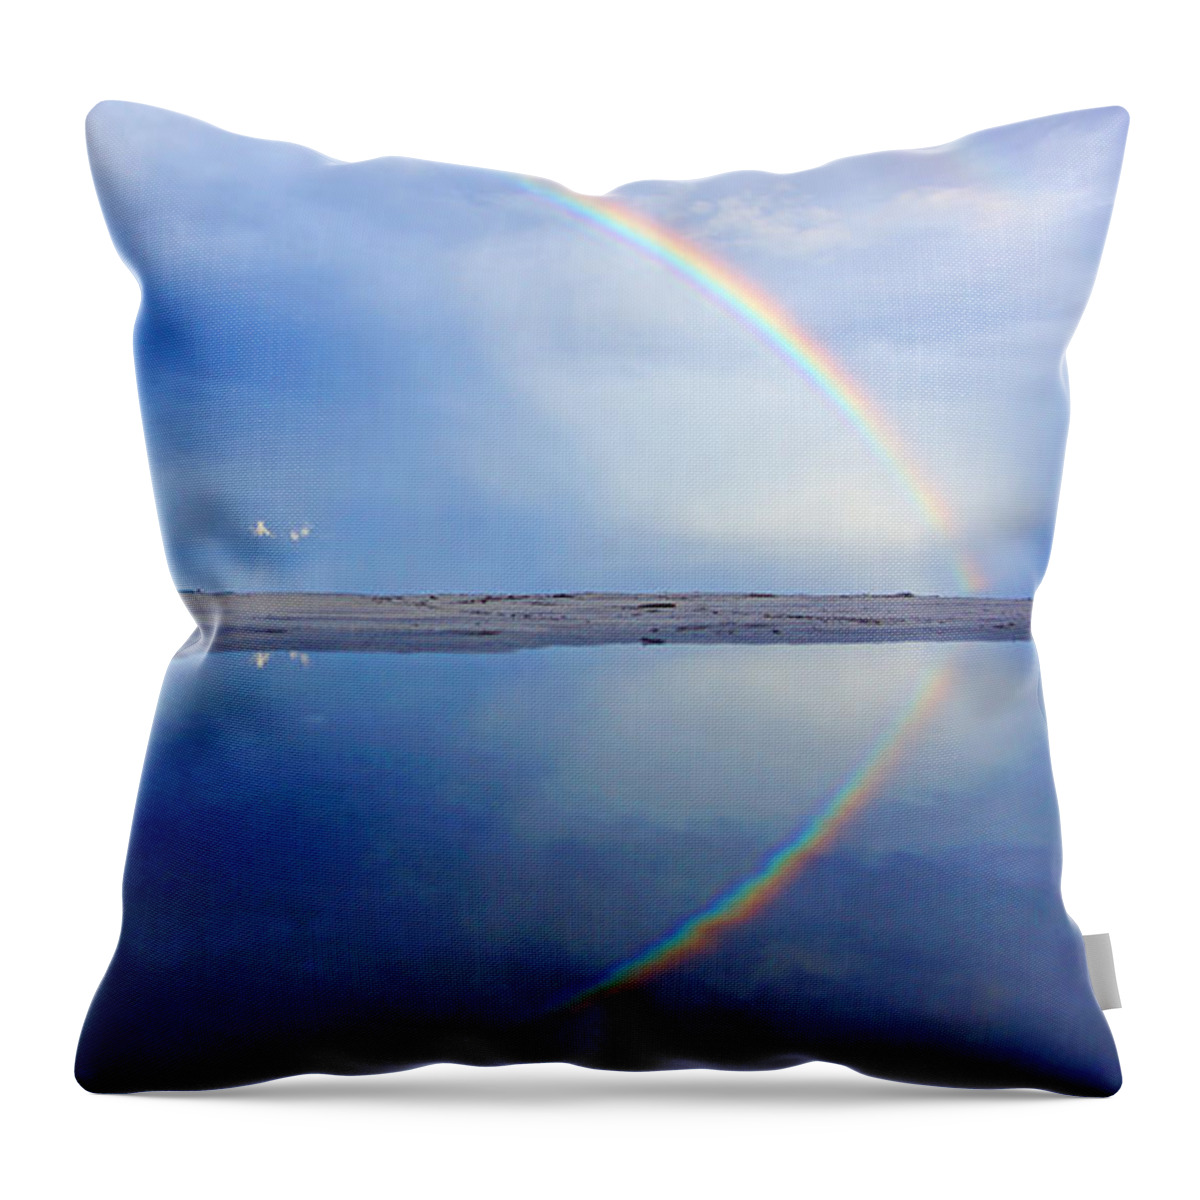 Rainbow Throw Pillow featuring the photograph Beach Rainbow Reflection by Lawrence S Richardson Jr